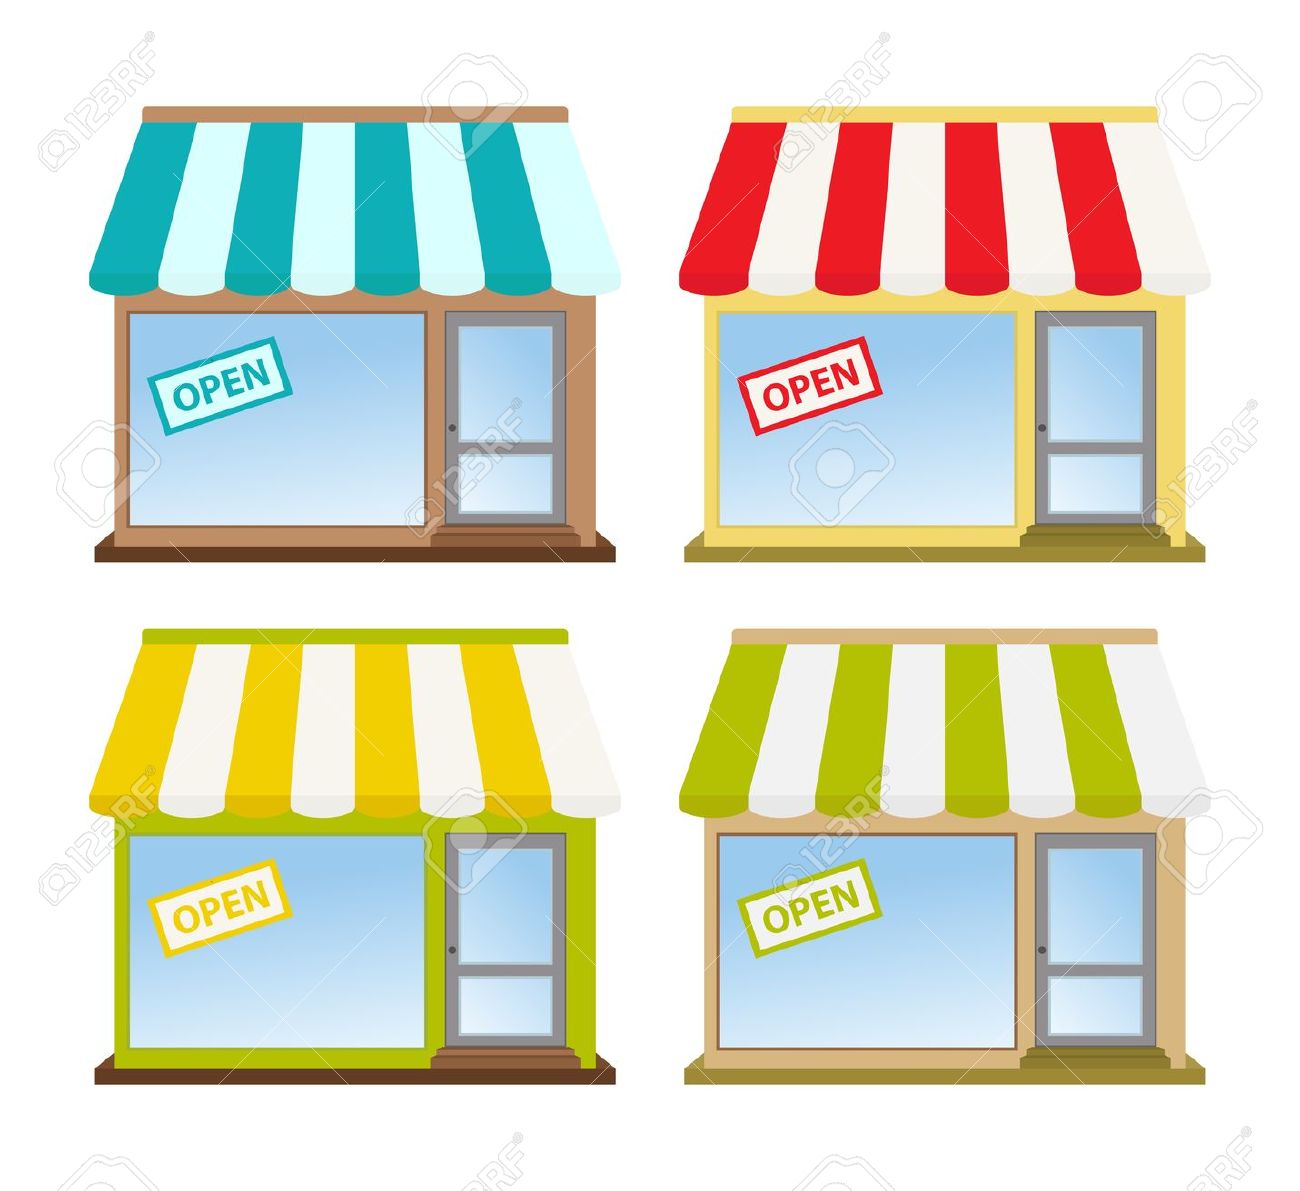 clipart of retail stores - photo #25